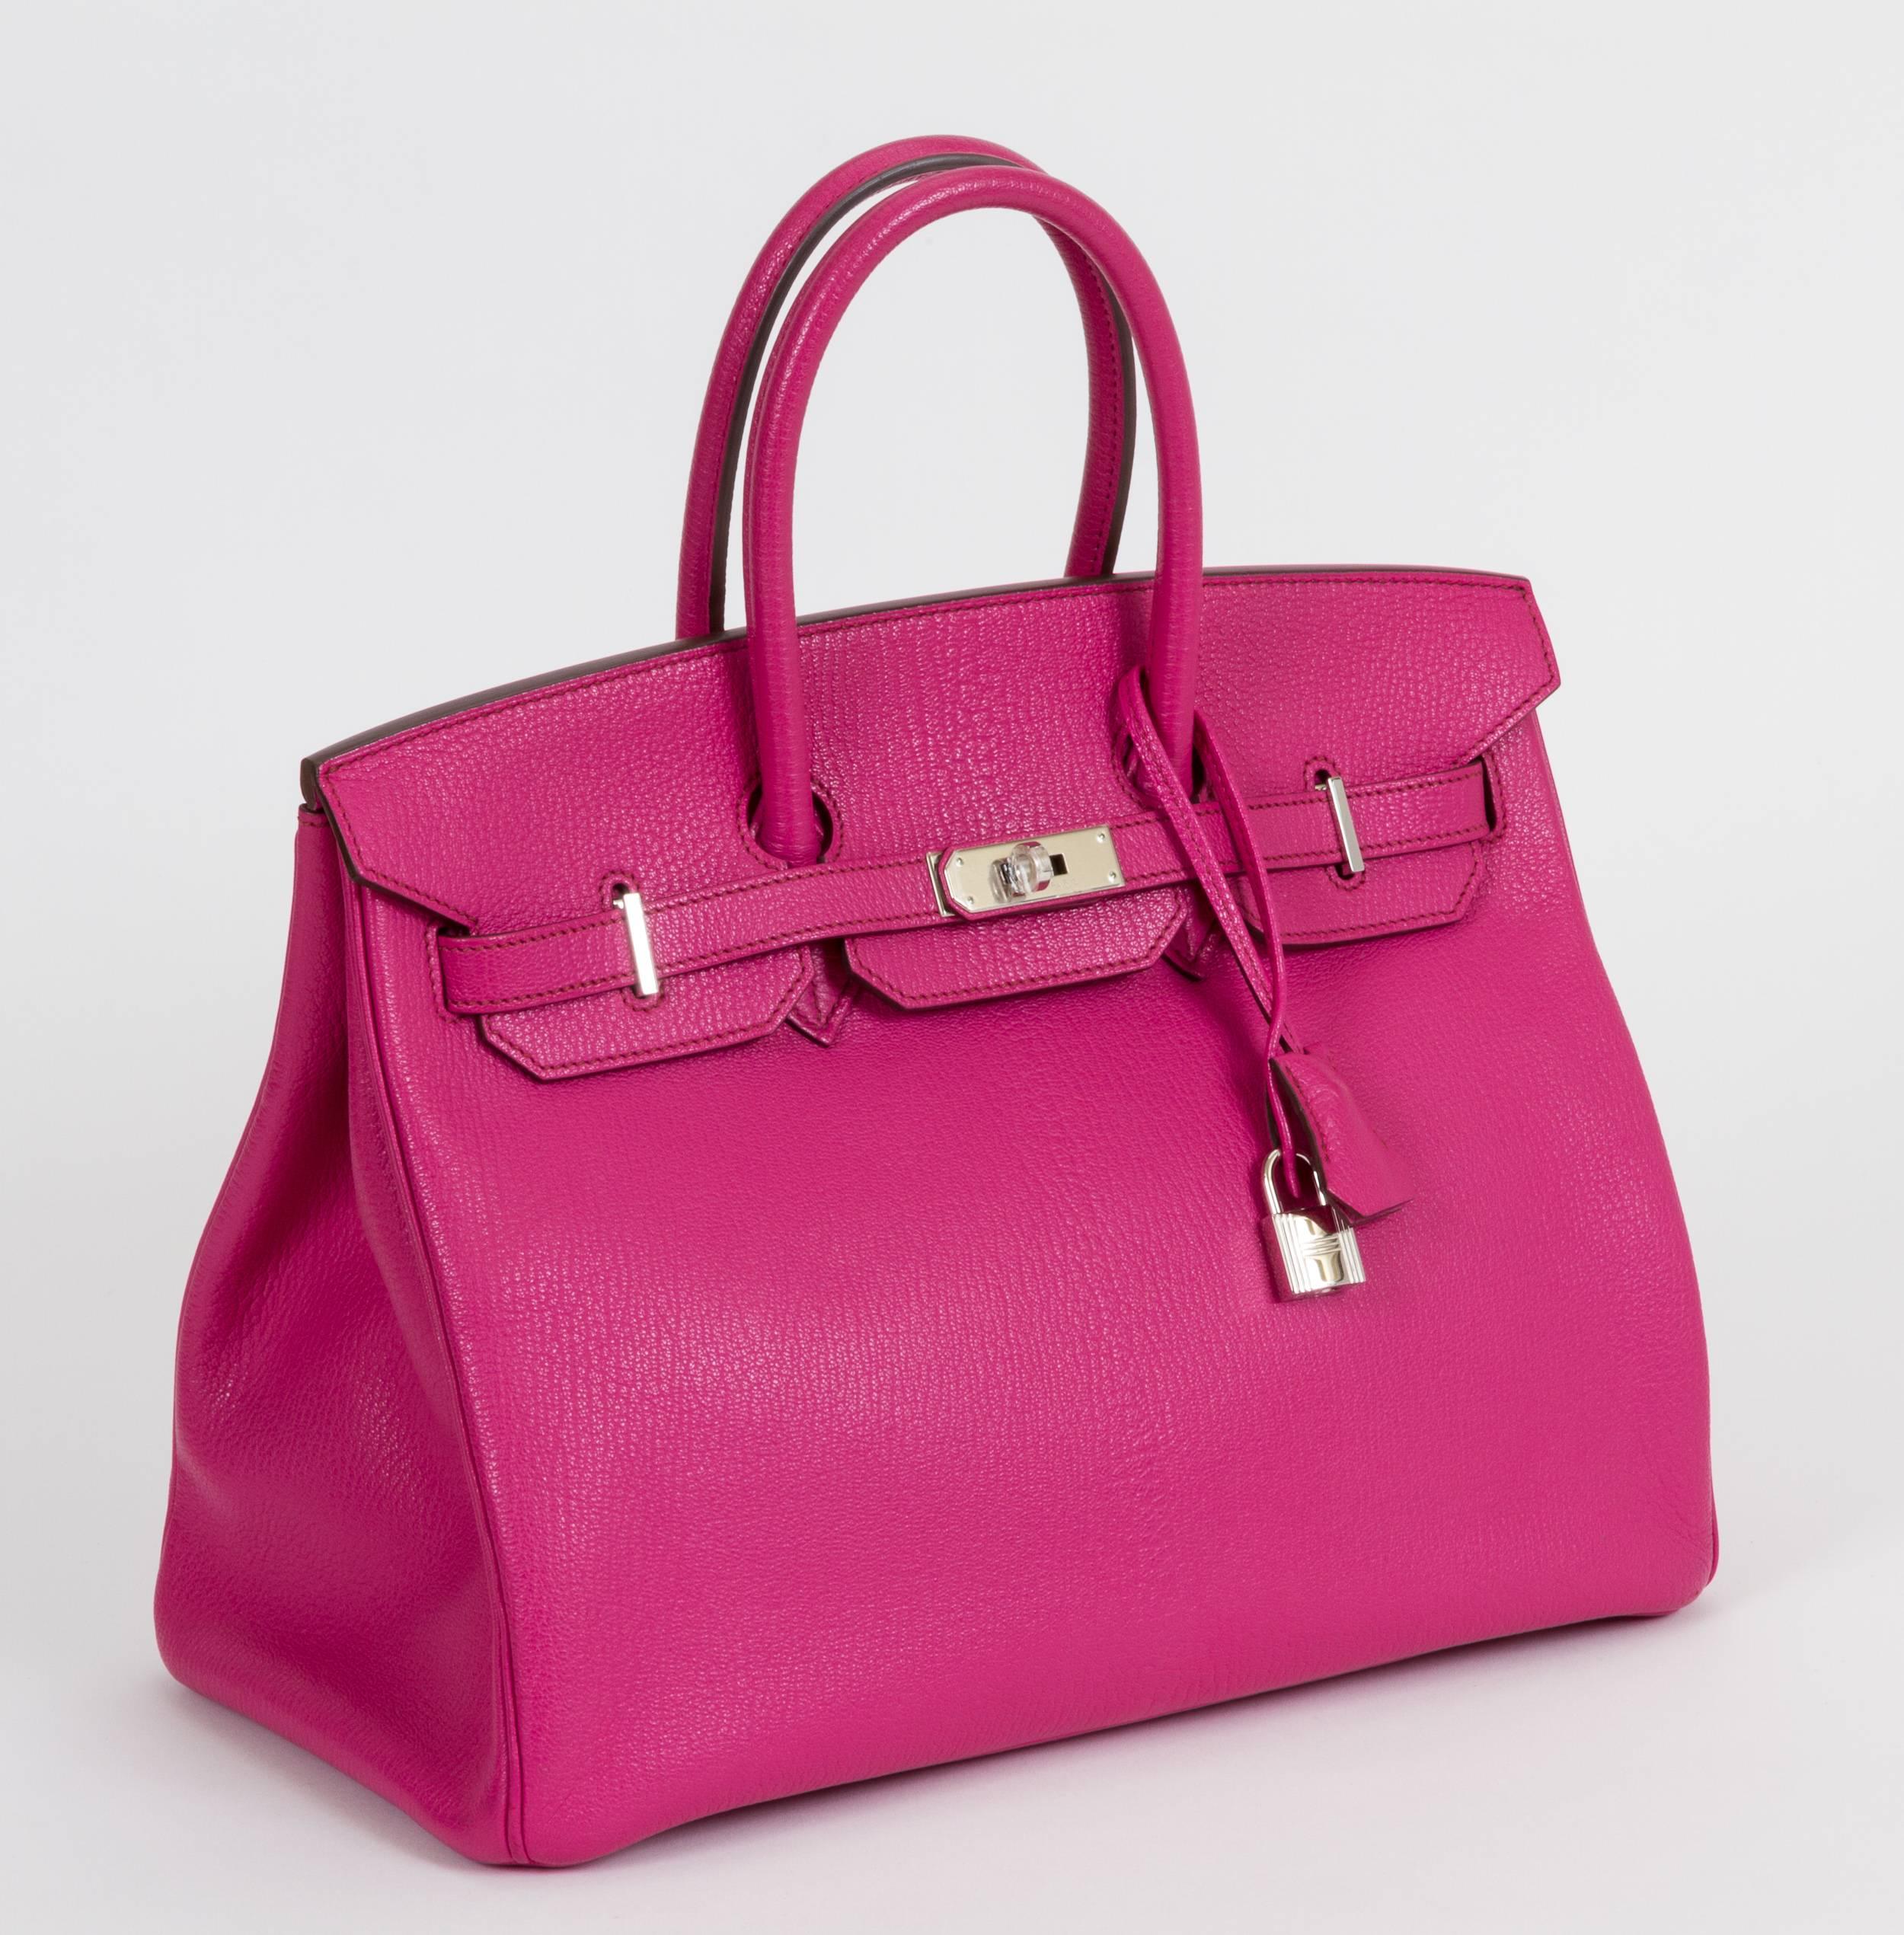 Hermès 35cm Birkin bag in Rose Shocking goat skin and palladium hardware. Partial plastic on hardware, has been carried. Includes clochette, tirette, lock, keys, rain jacket, dust bag, and gift bag. Date stamp M in a square for 2009.